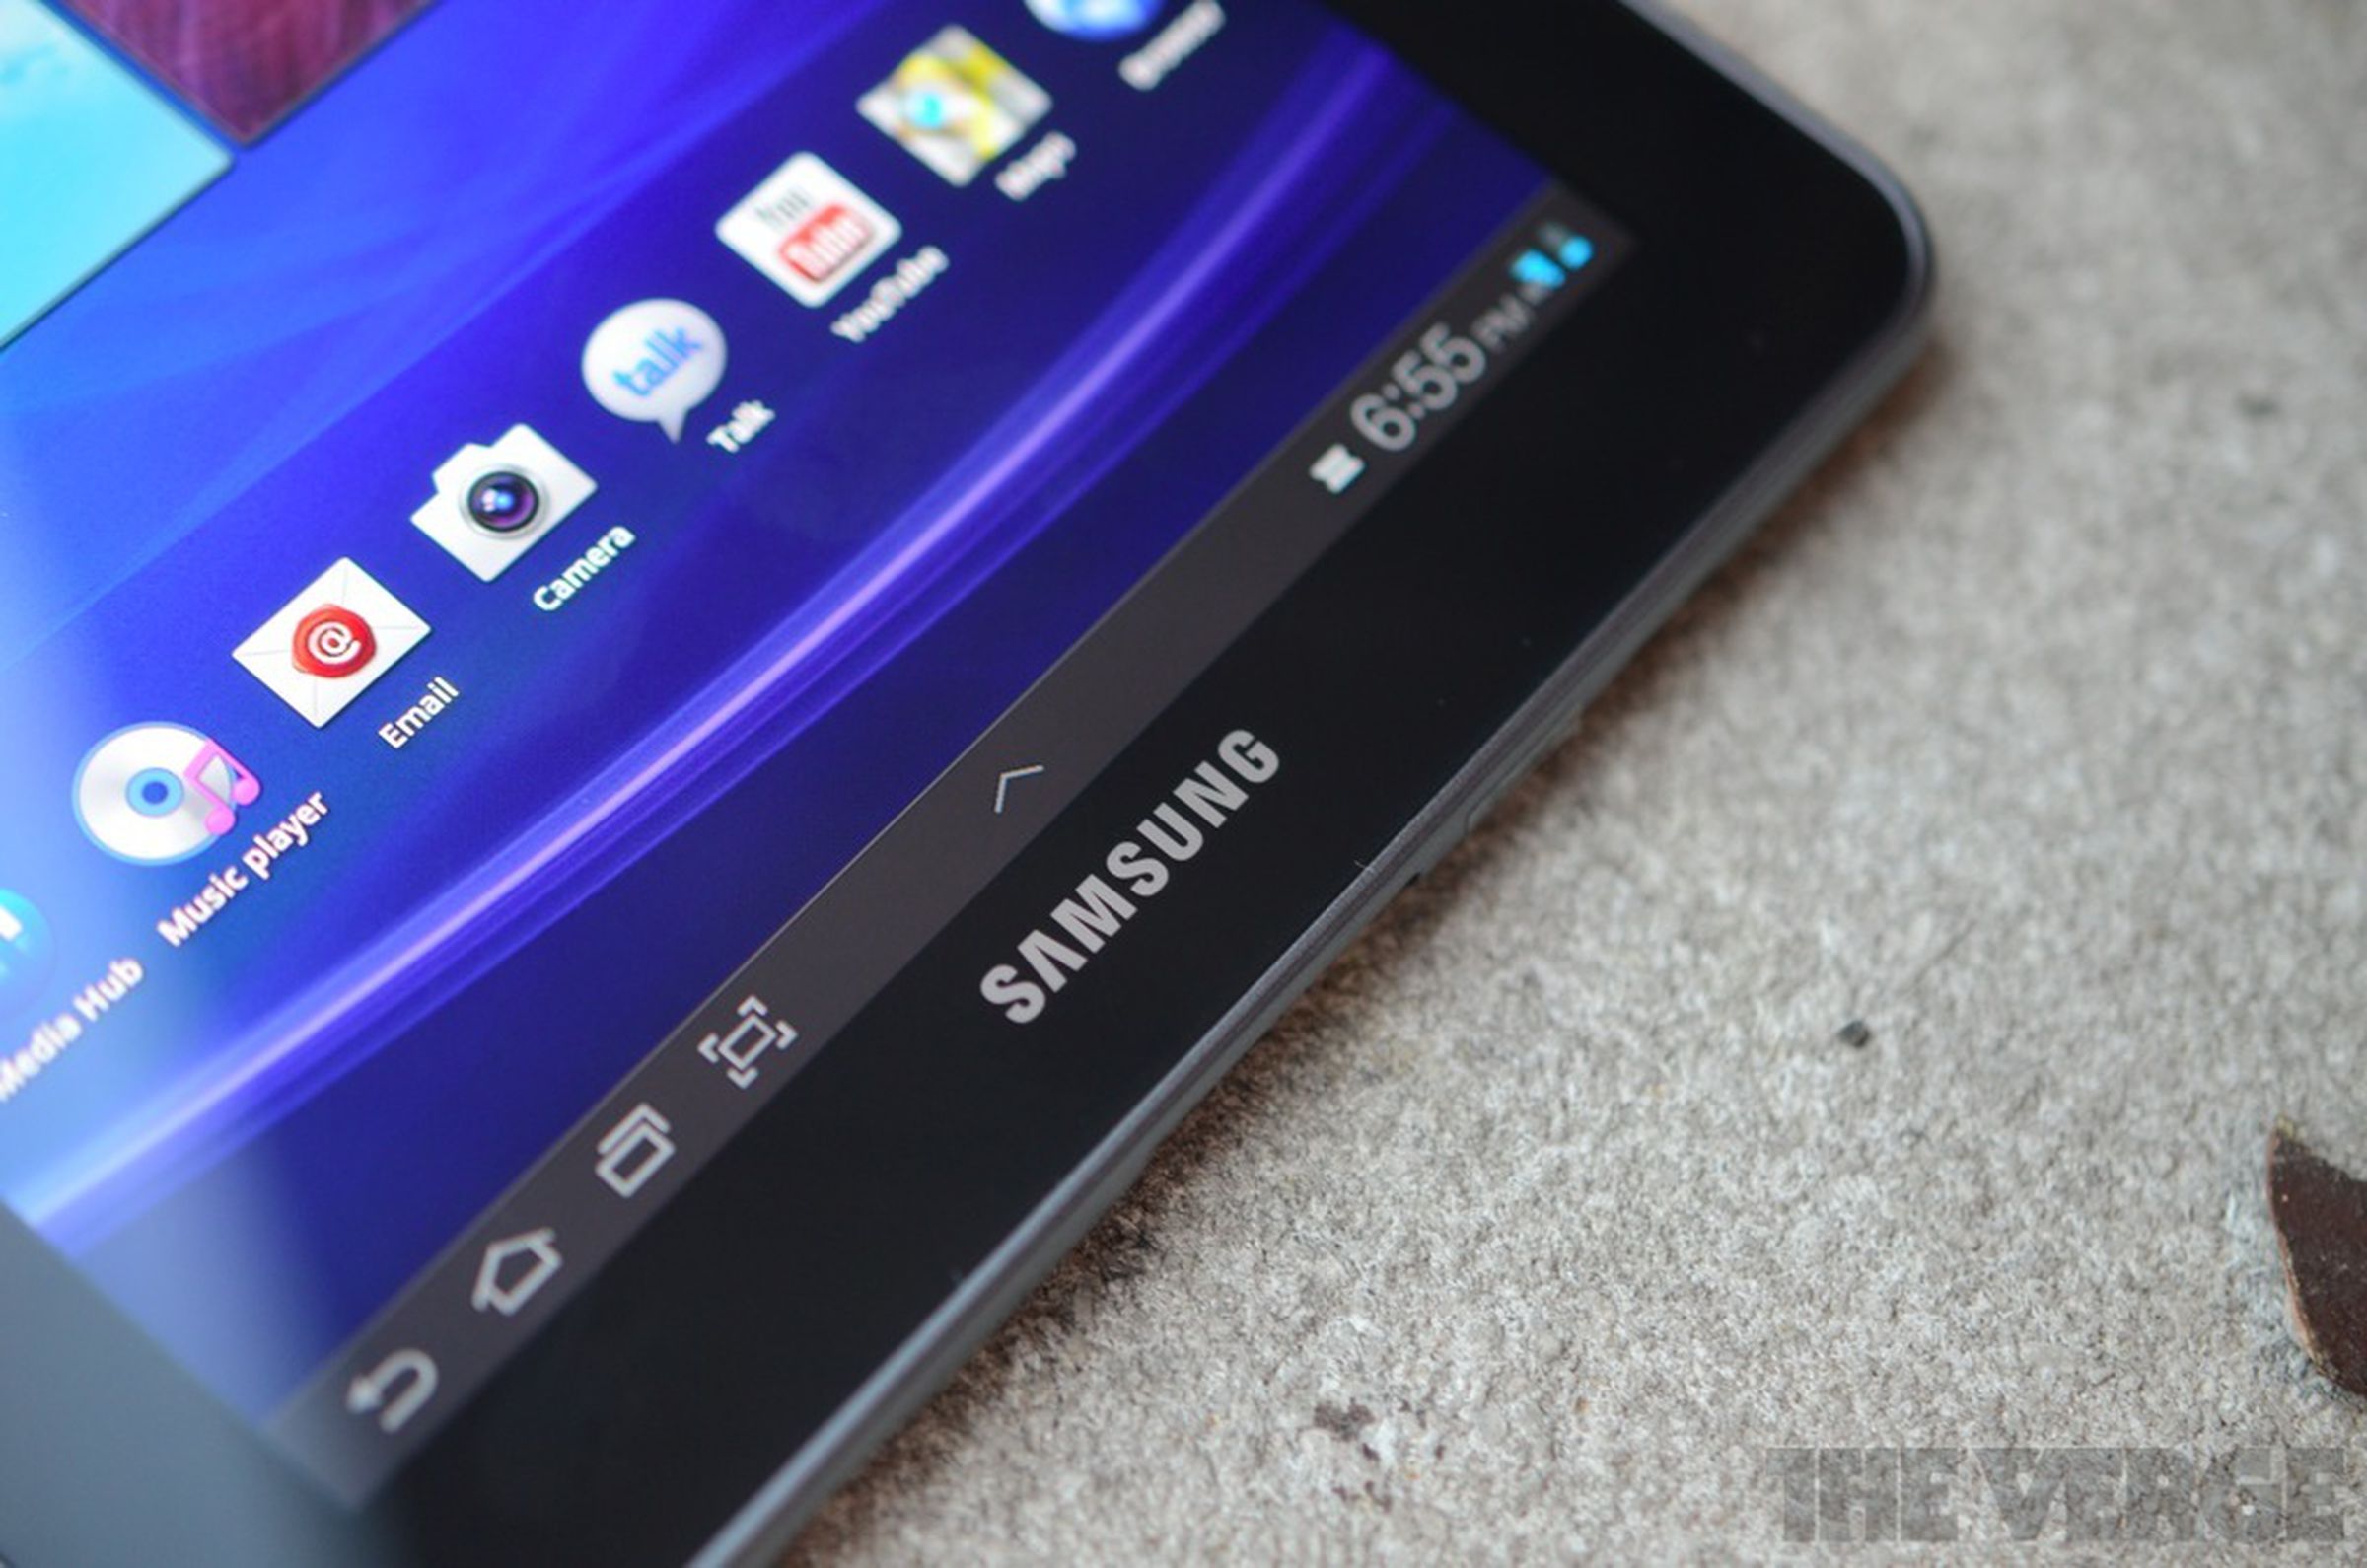 Samsung Galaxy Tab 7.7 for Verizon review pictures